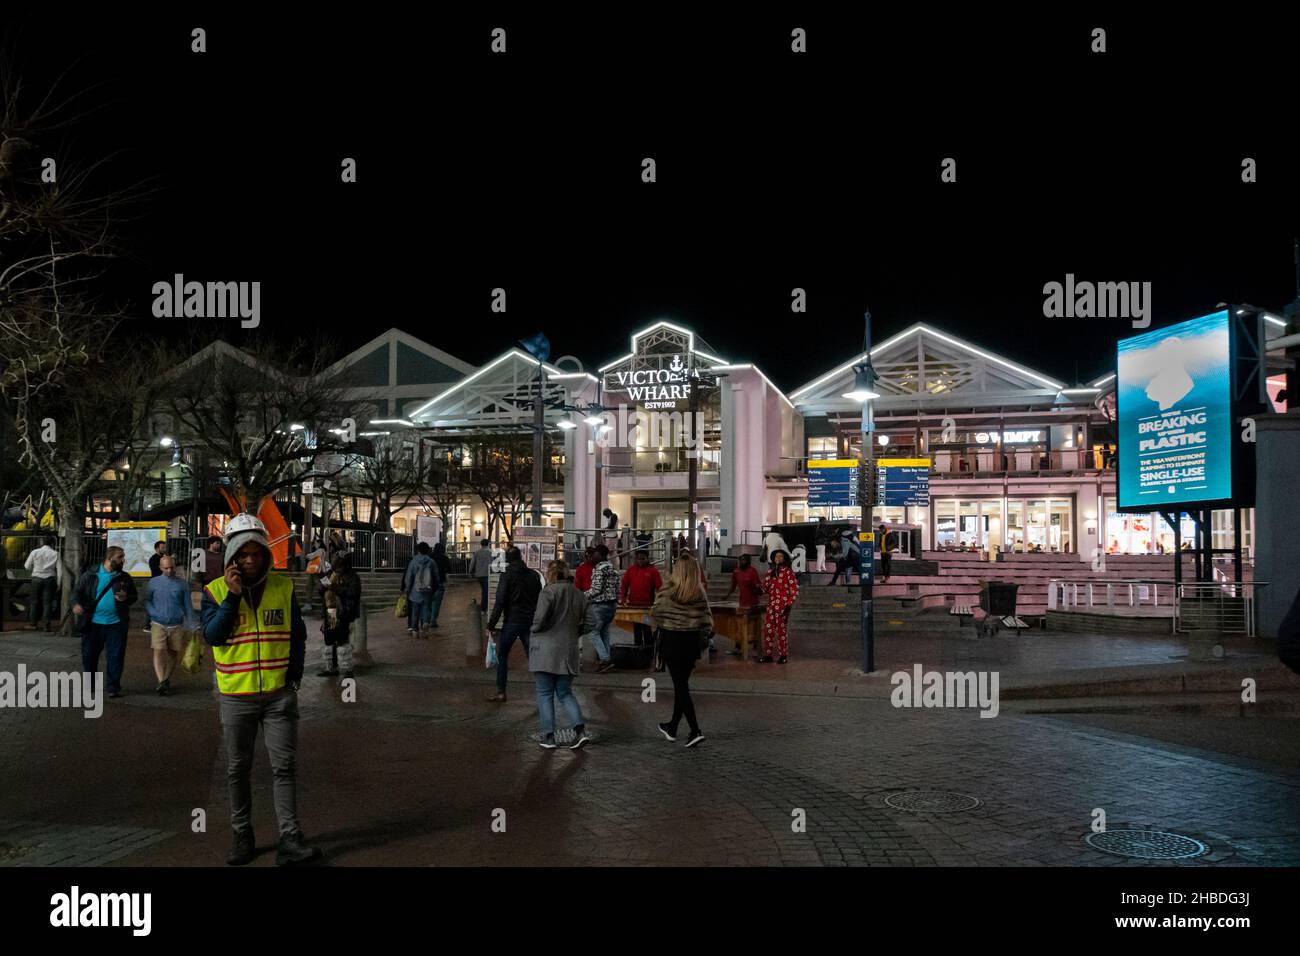 Shoppng Centre at Victoria and Alfred Waterfront at night, Cape Town, South Africa Stock Photo